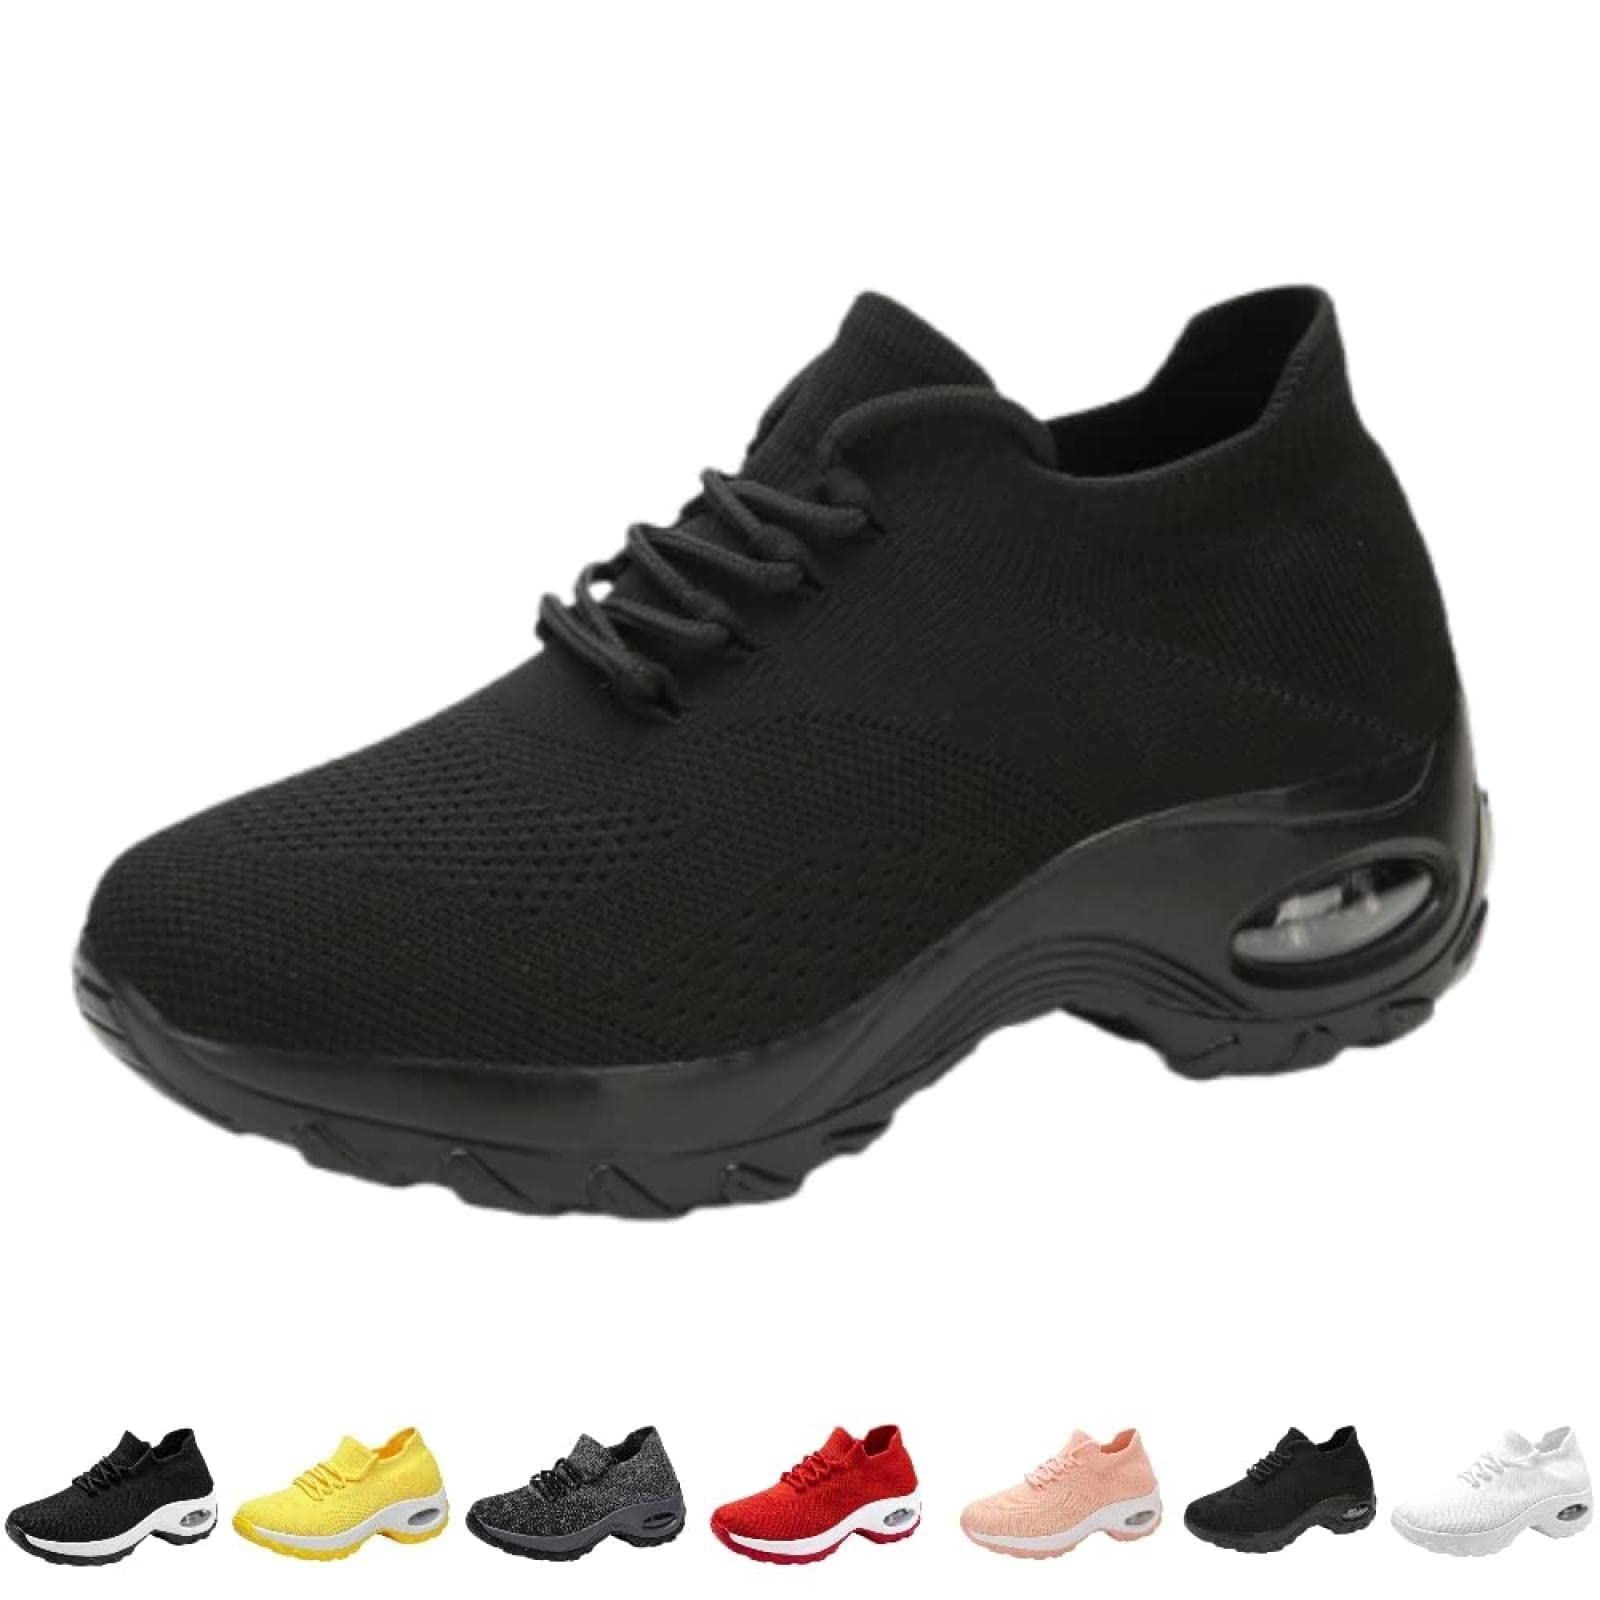 Wholesale Original Stylish High Quality Trending Casual Men's Soft Cushion  Sole Fashion Running Sports Footwear Sneakers Trainer Shoes From  m.alibaba.com